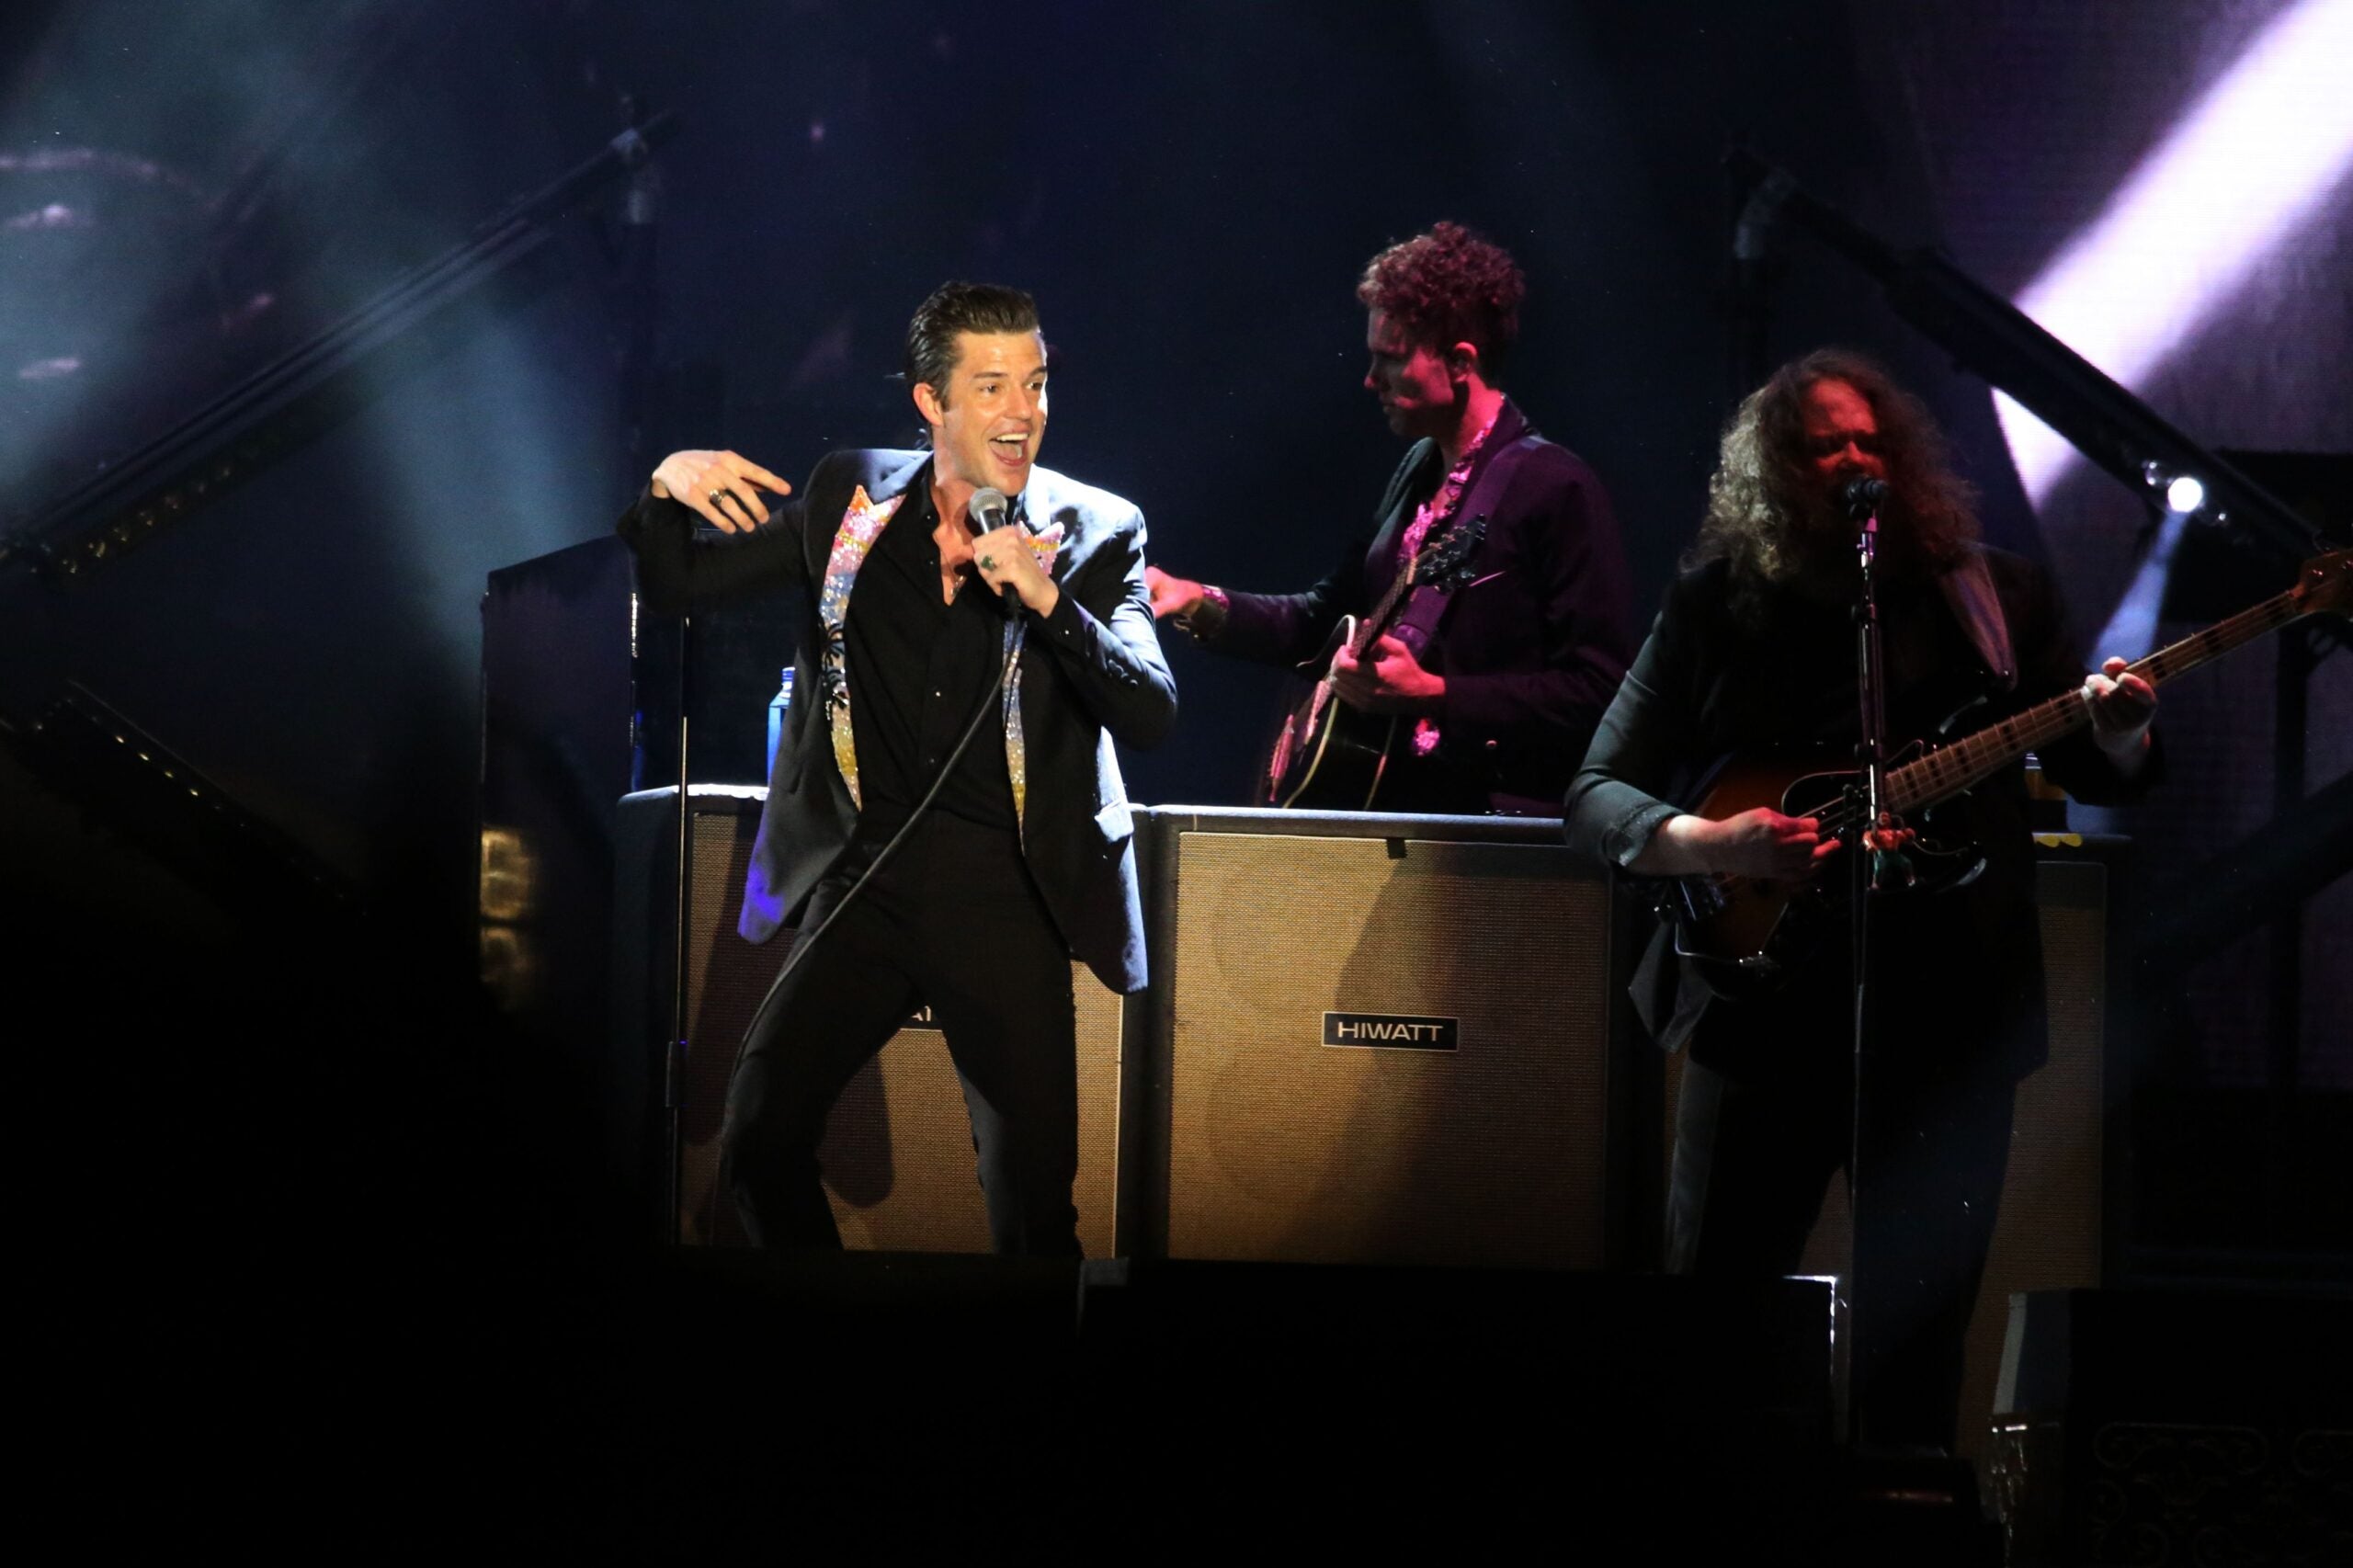 Lead singer Brandon Flowers performs with the Killers during the Boston Calling Music Festival in Allston, MA on May 25, 2018.